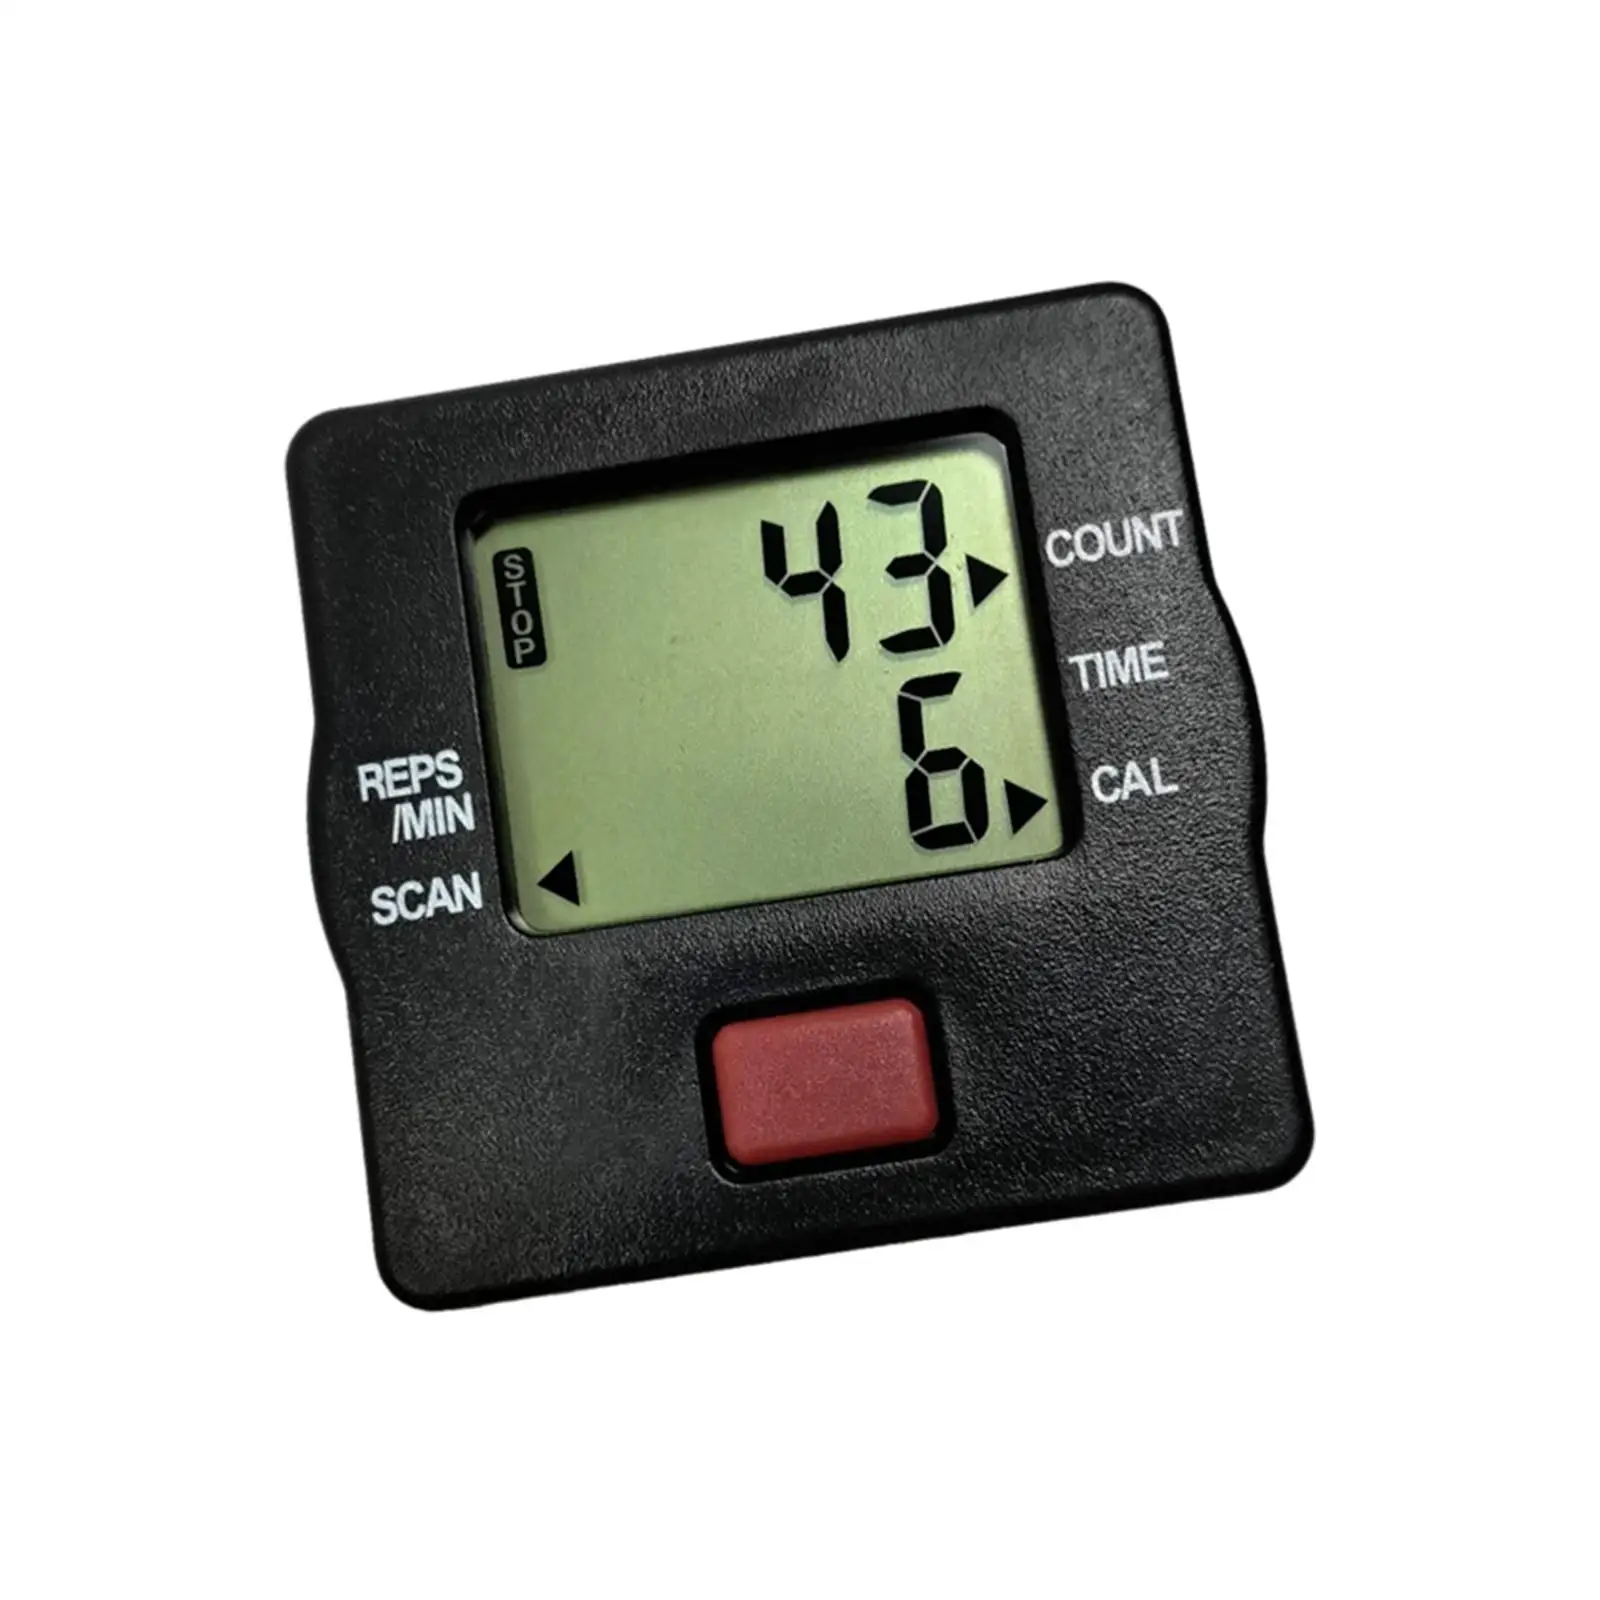 Stepper Counter Monitor Speedometer for Abdominal Device Belly Machine Count